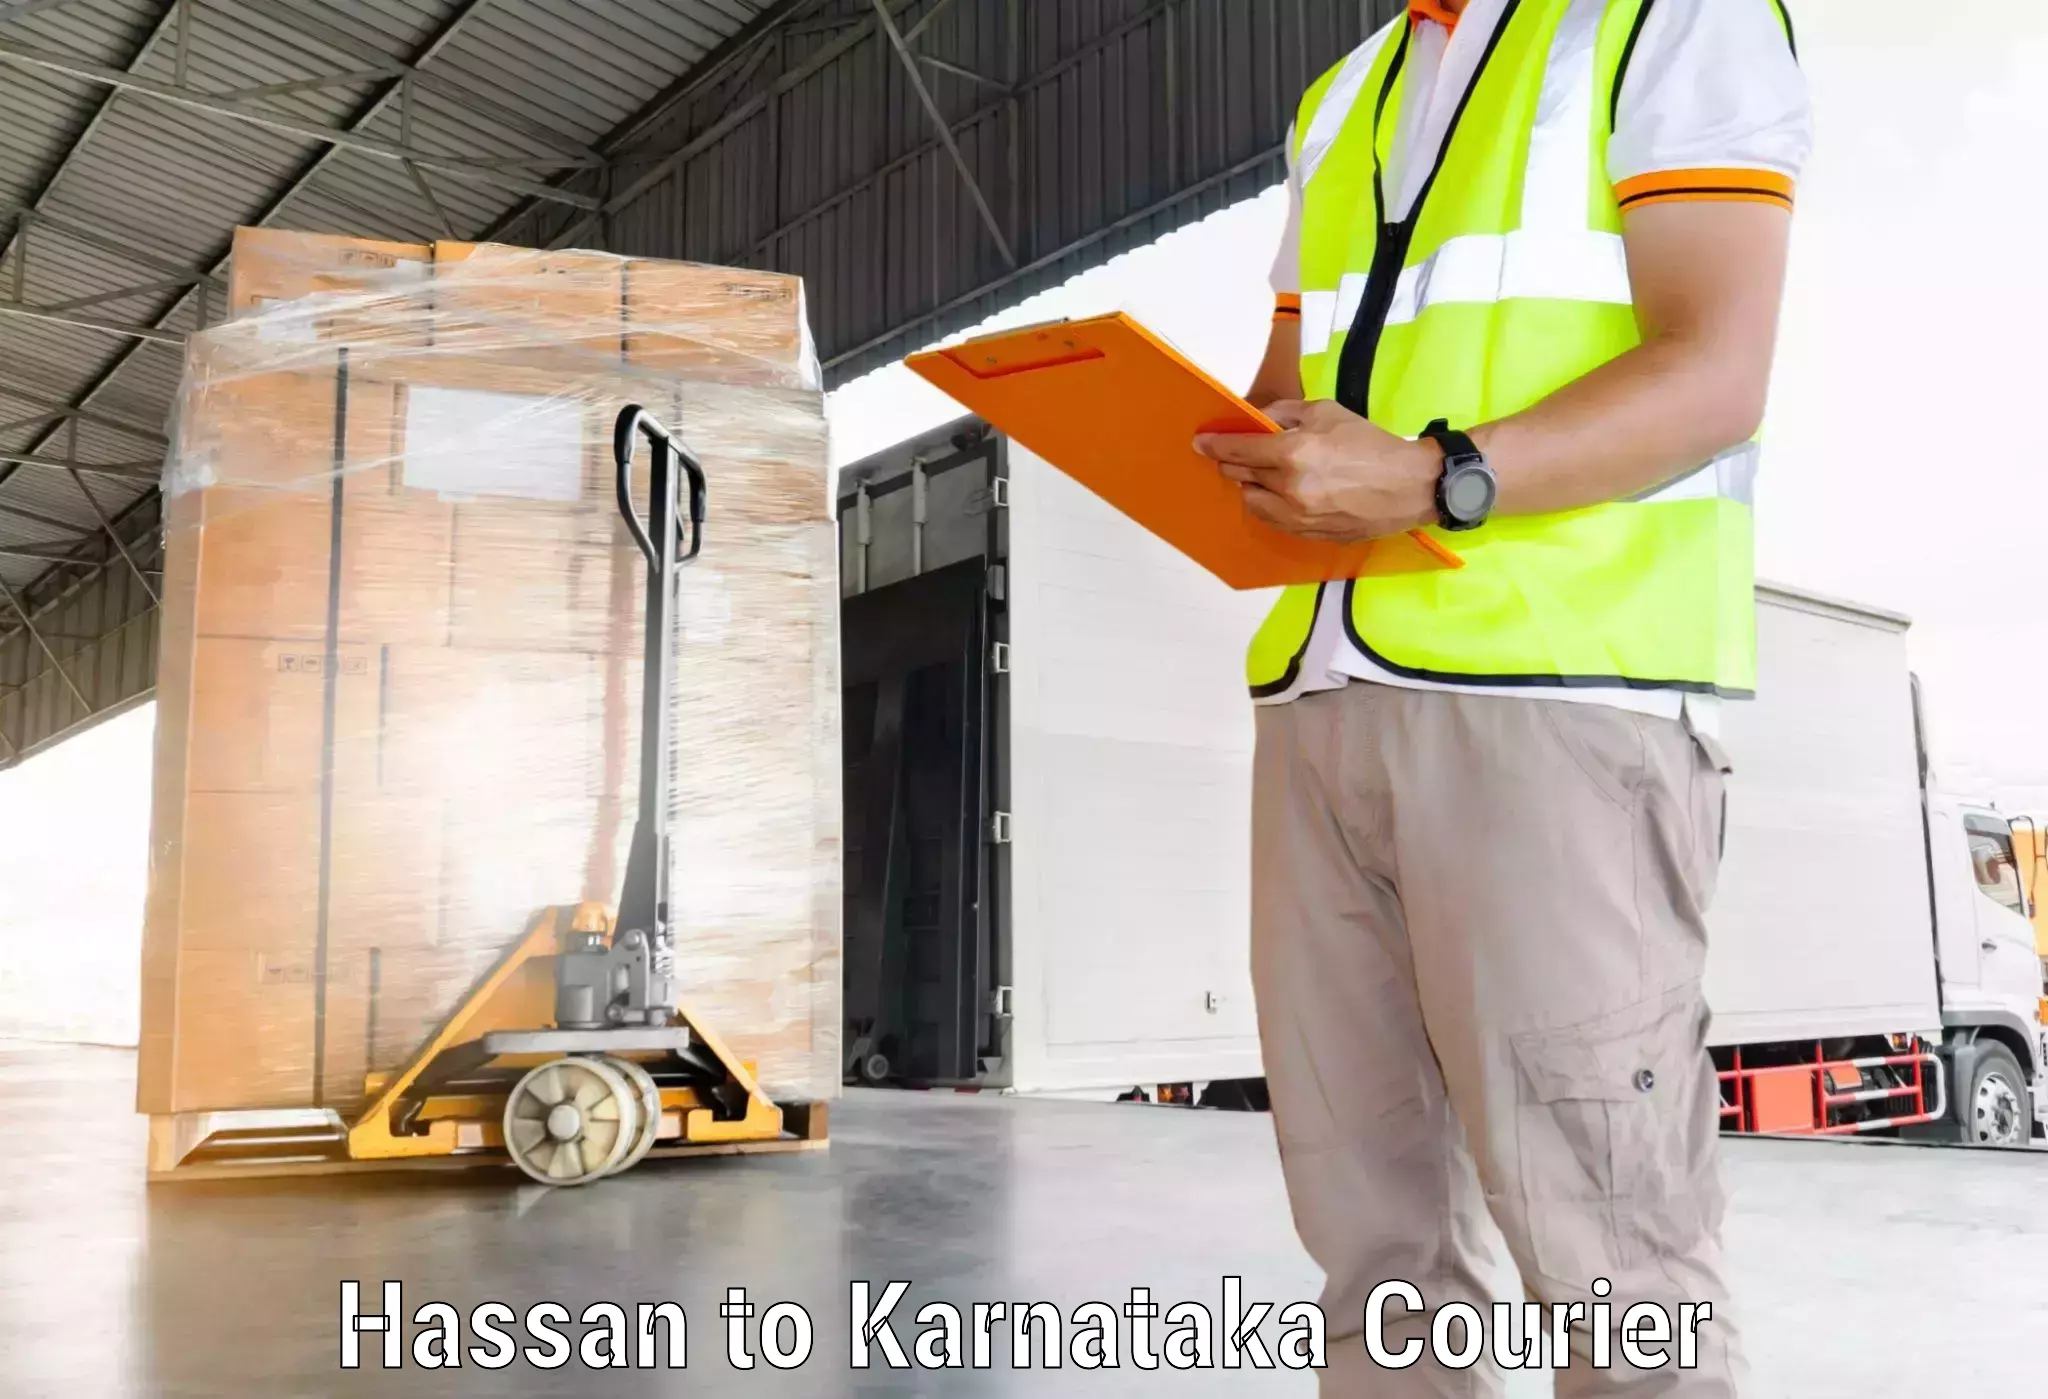 Ocean freight courier Hassan to Hassan